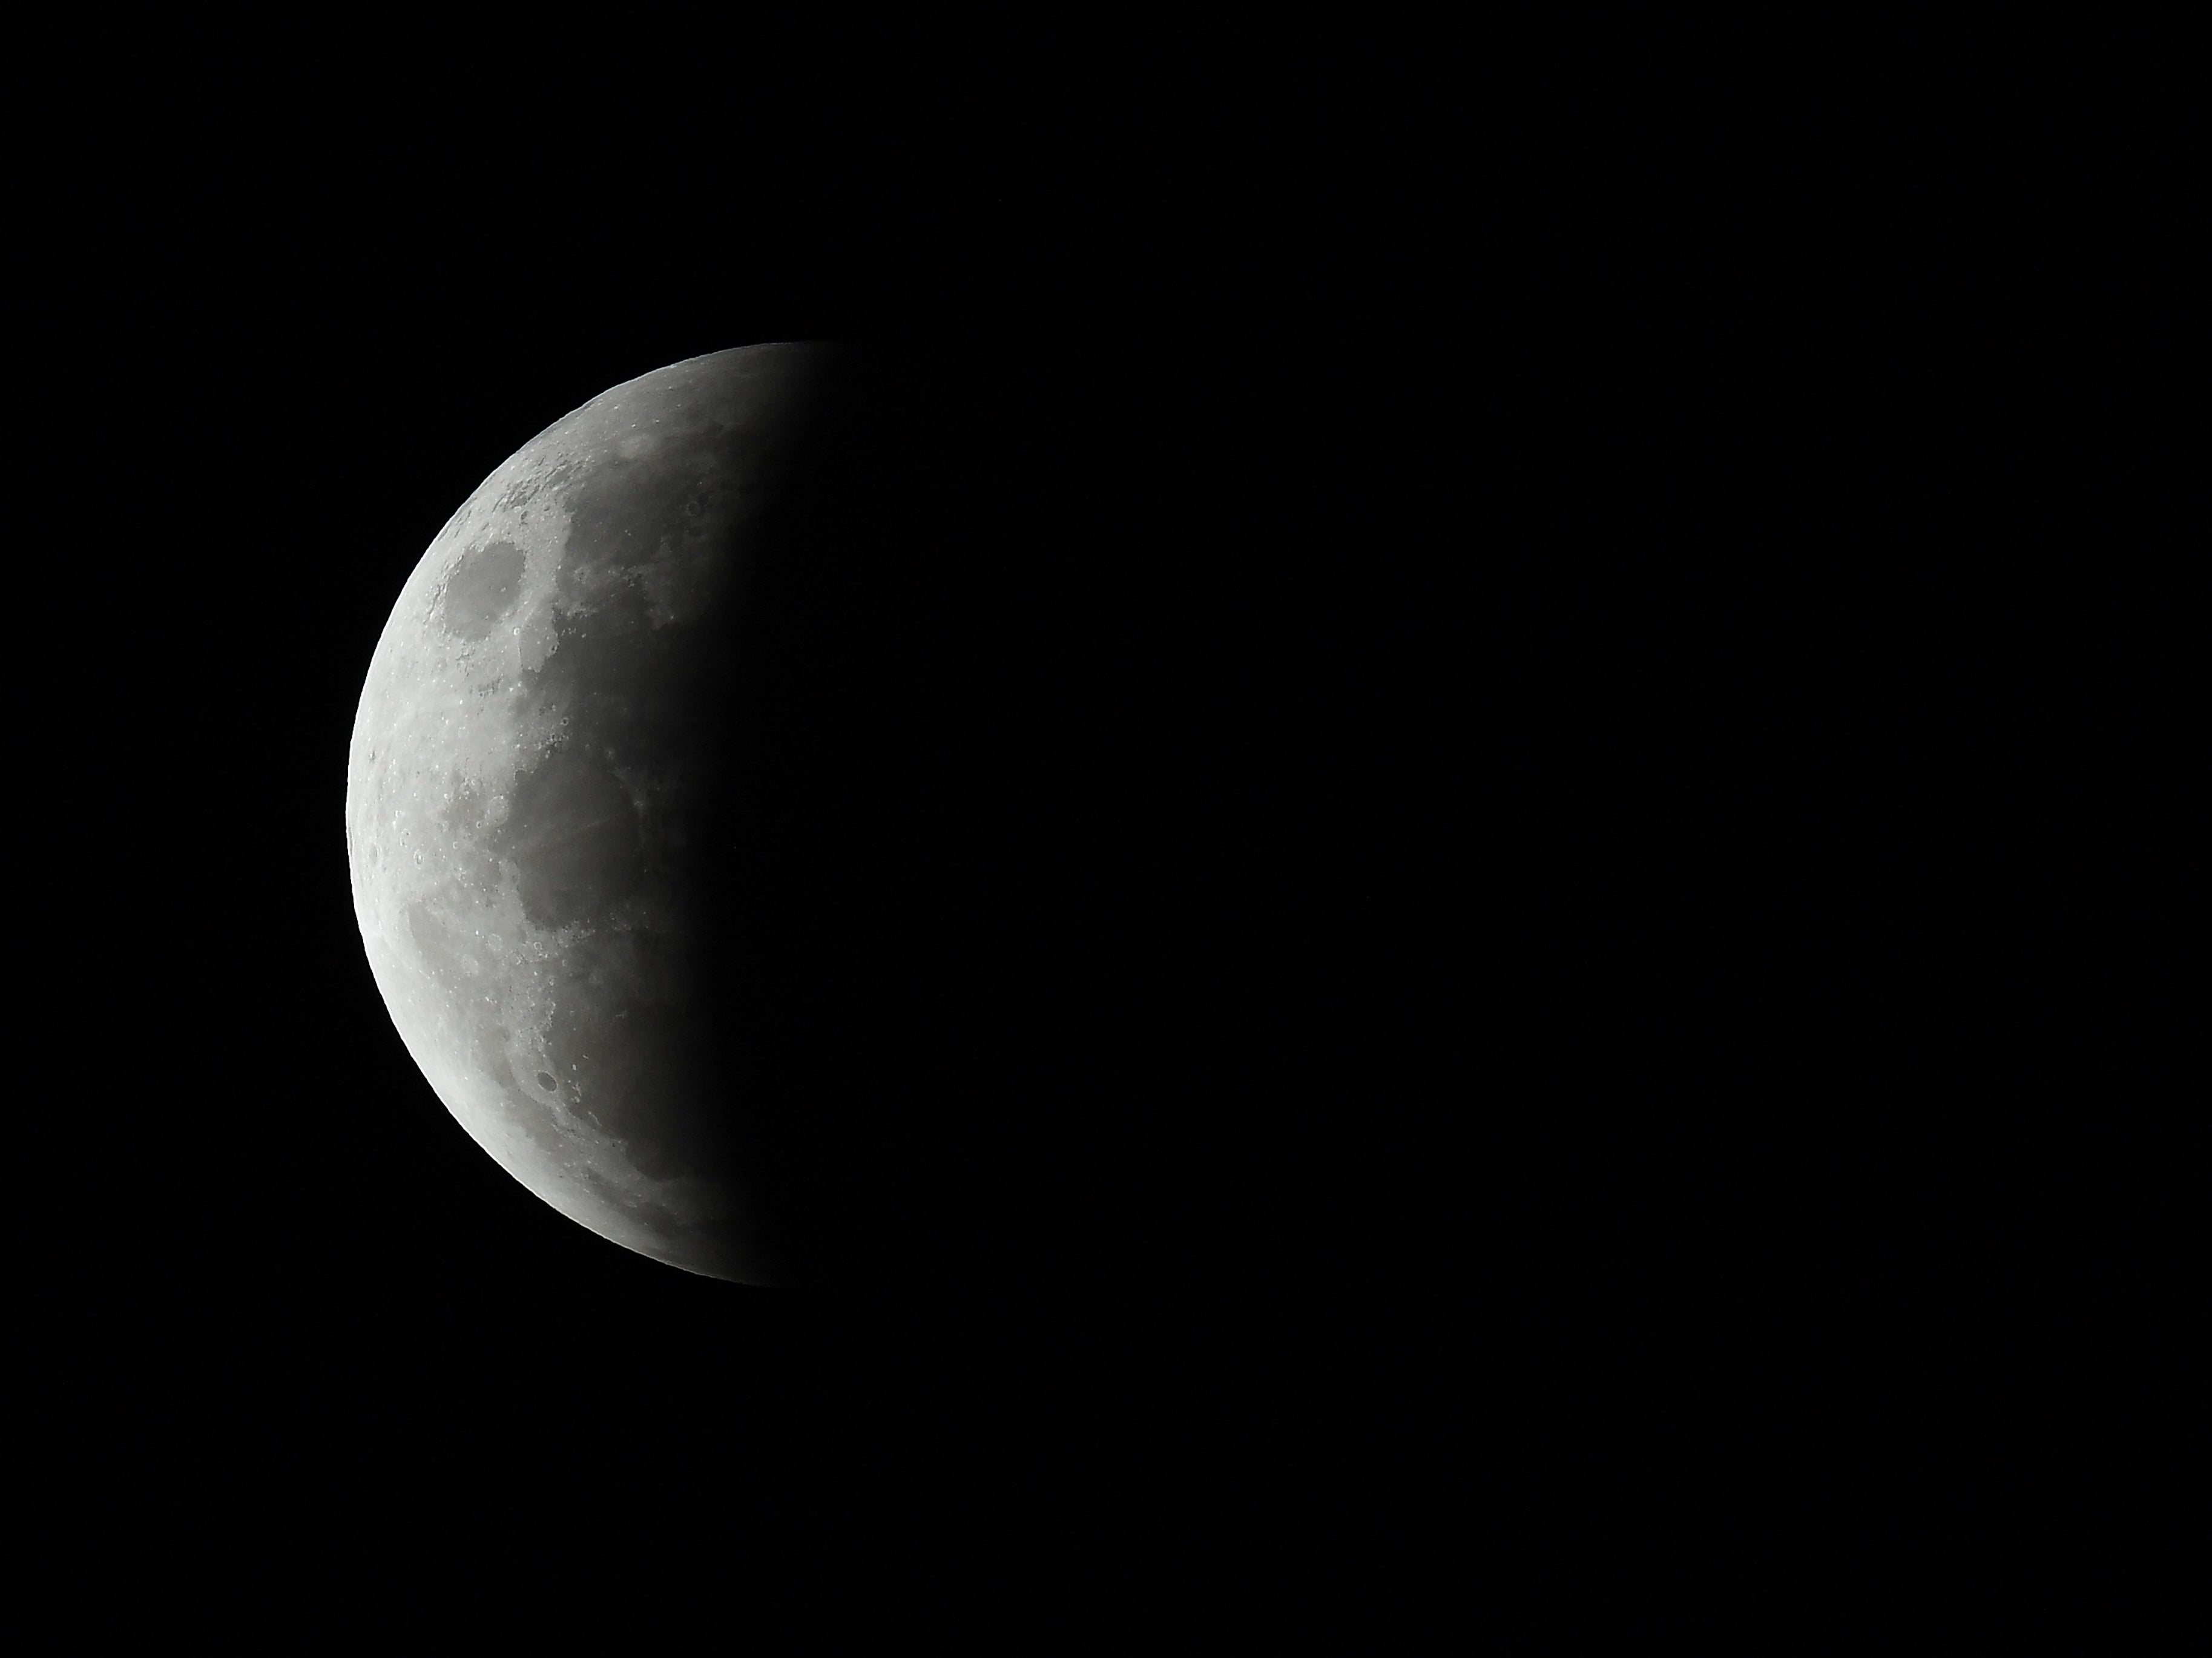 The progression of the eclipse begins with a partial covering of the moon as seen in Sydney, Australia, on Wednesday 26 May 2021